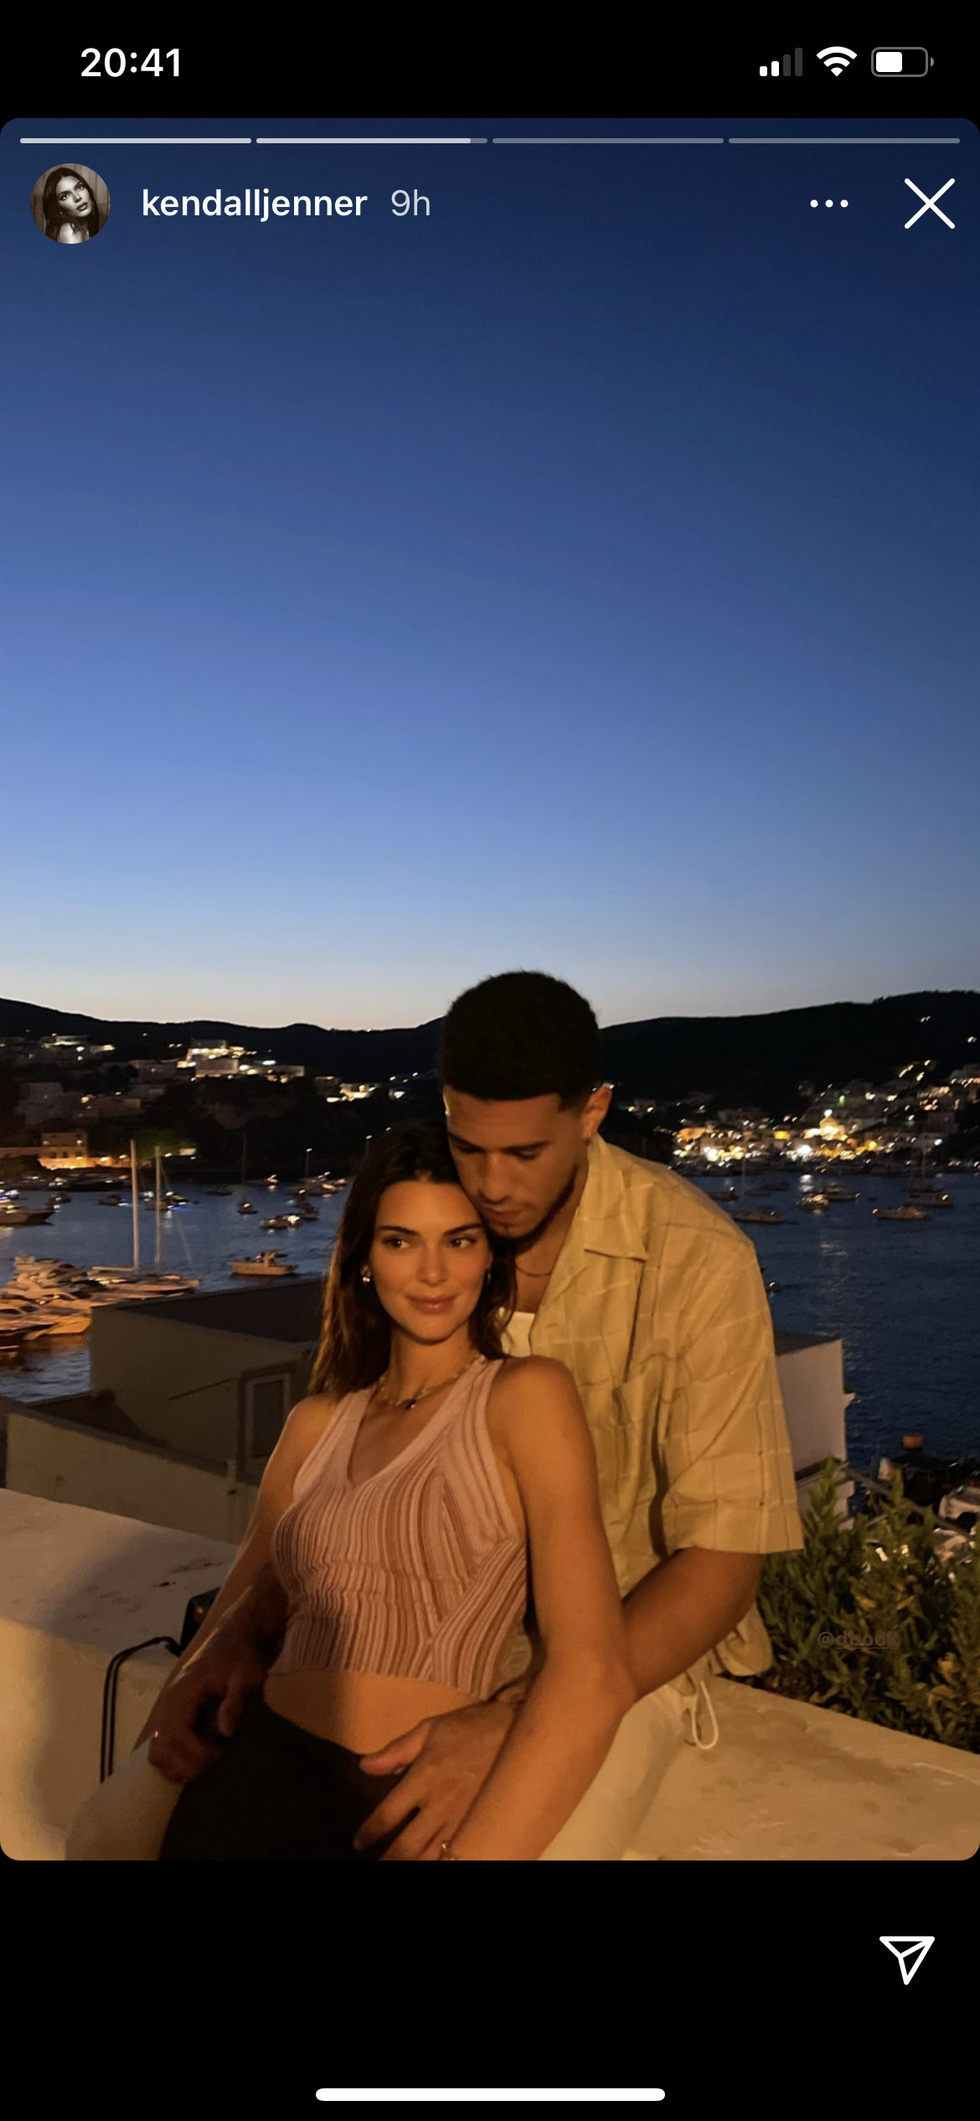 Devin Booker addresses his relationship with Kendall Jenner